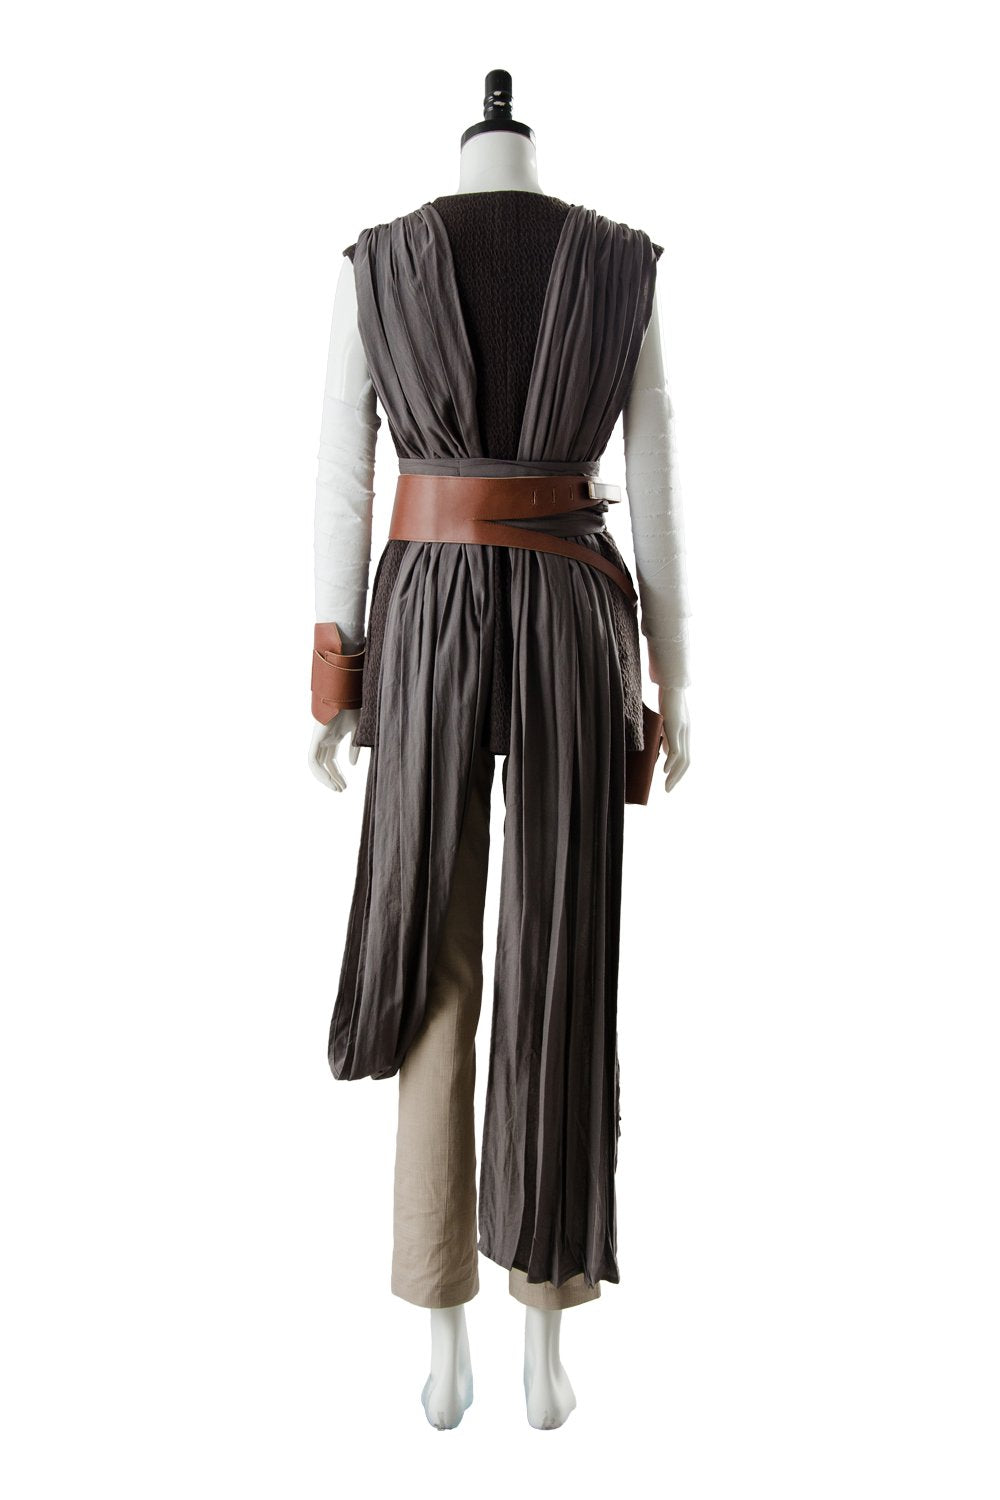 Star Wars 8 The Last Jedi Rey Outfit Ver.2 Cosplay Costume